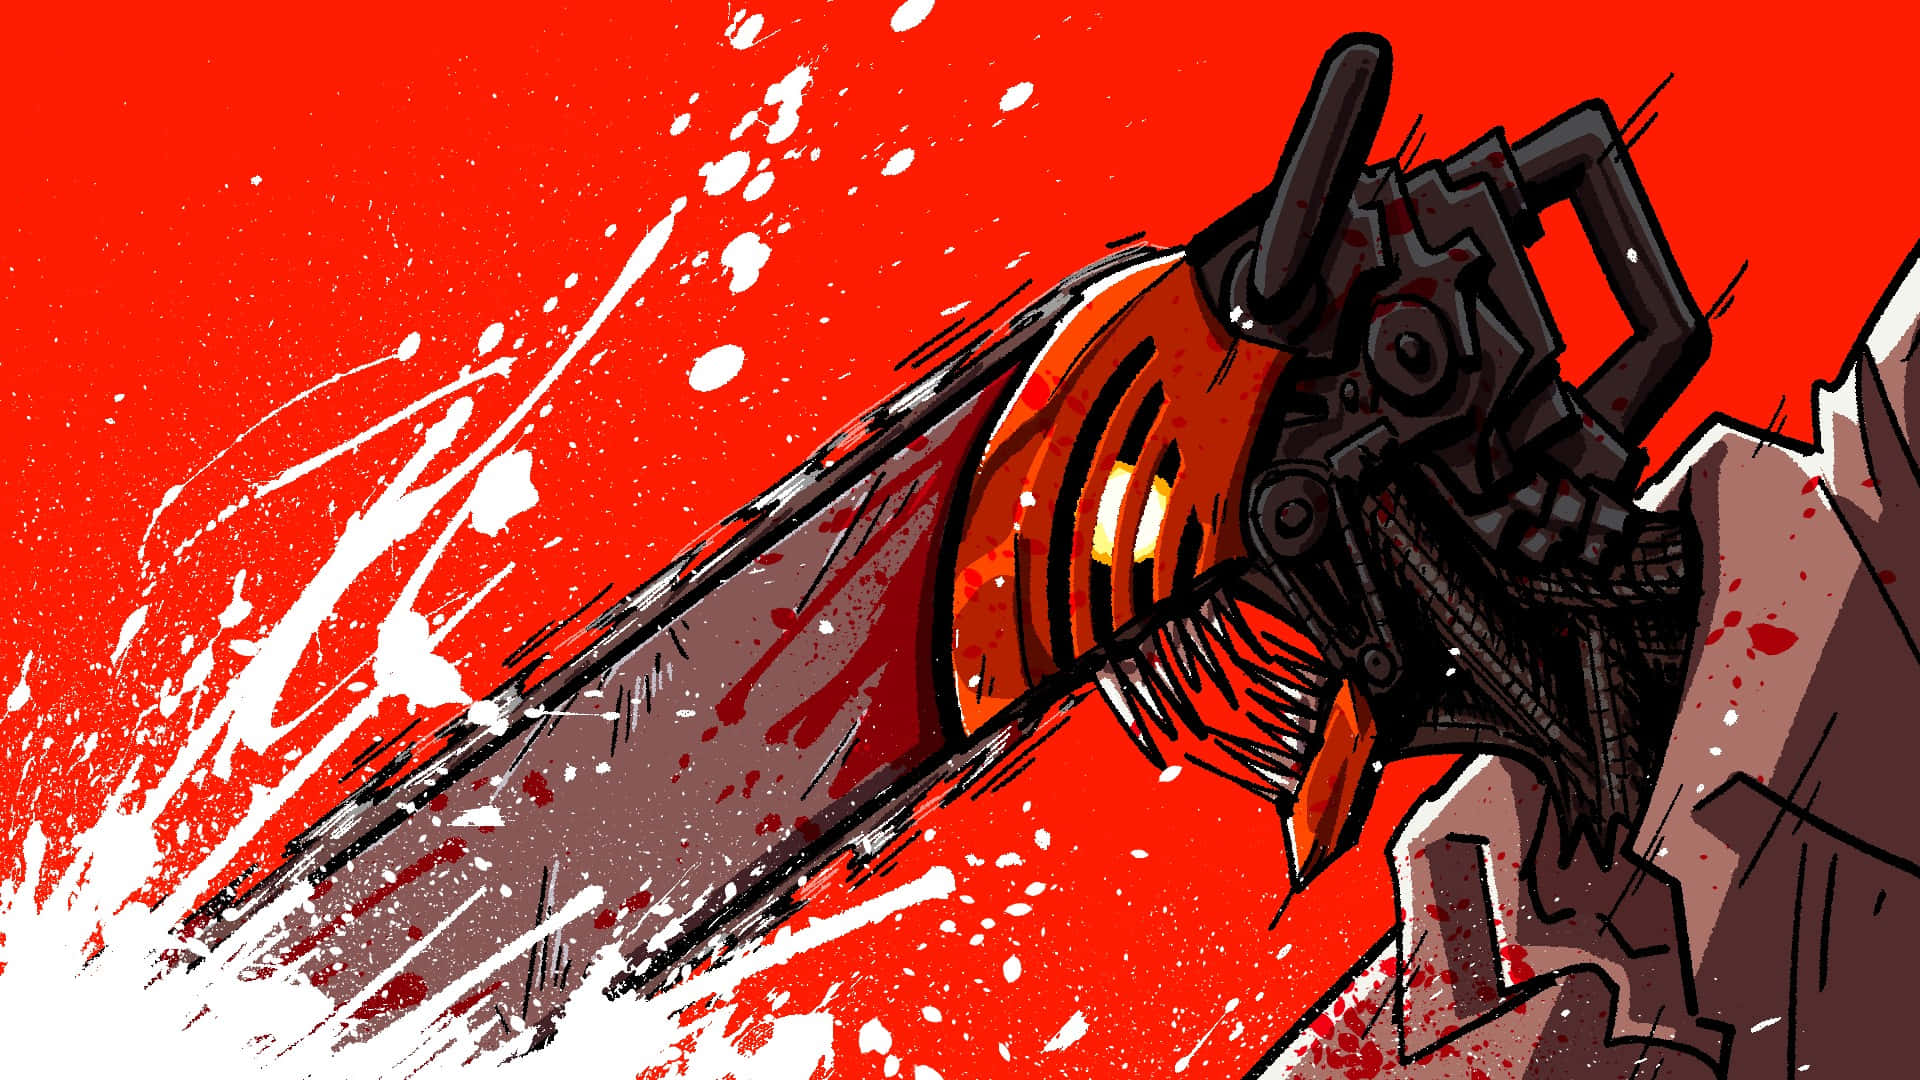 Intense Chainsaw Action Wallpaper